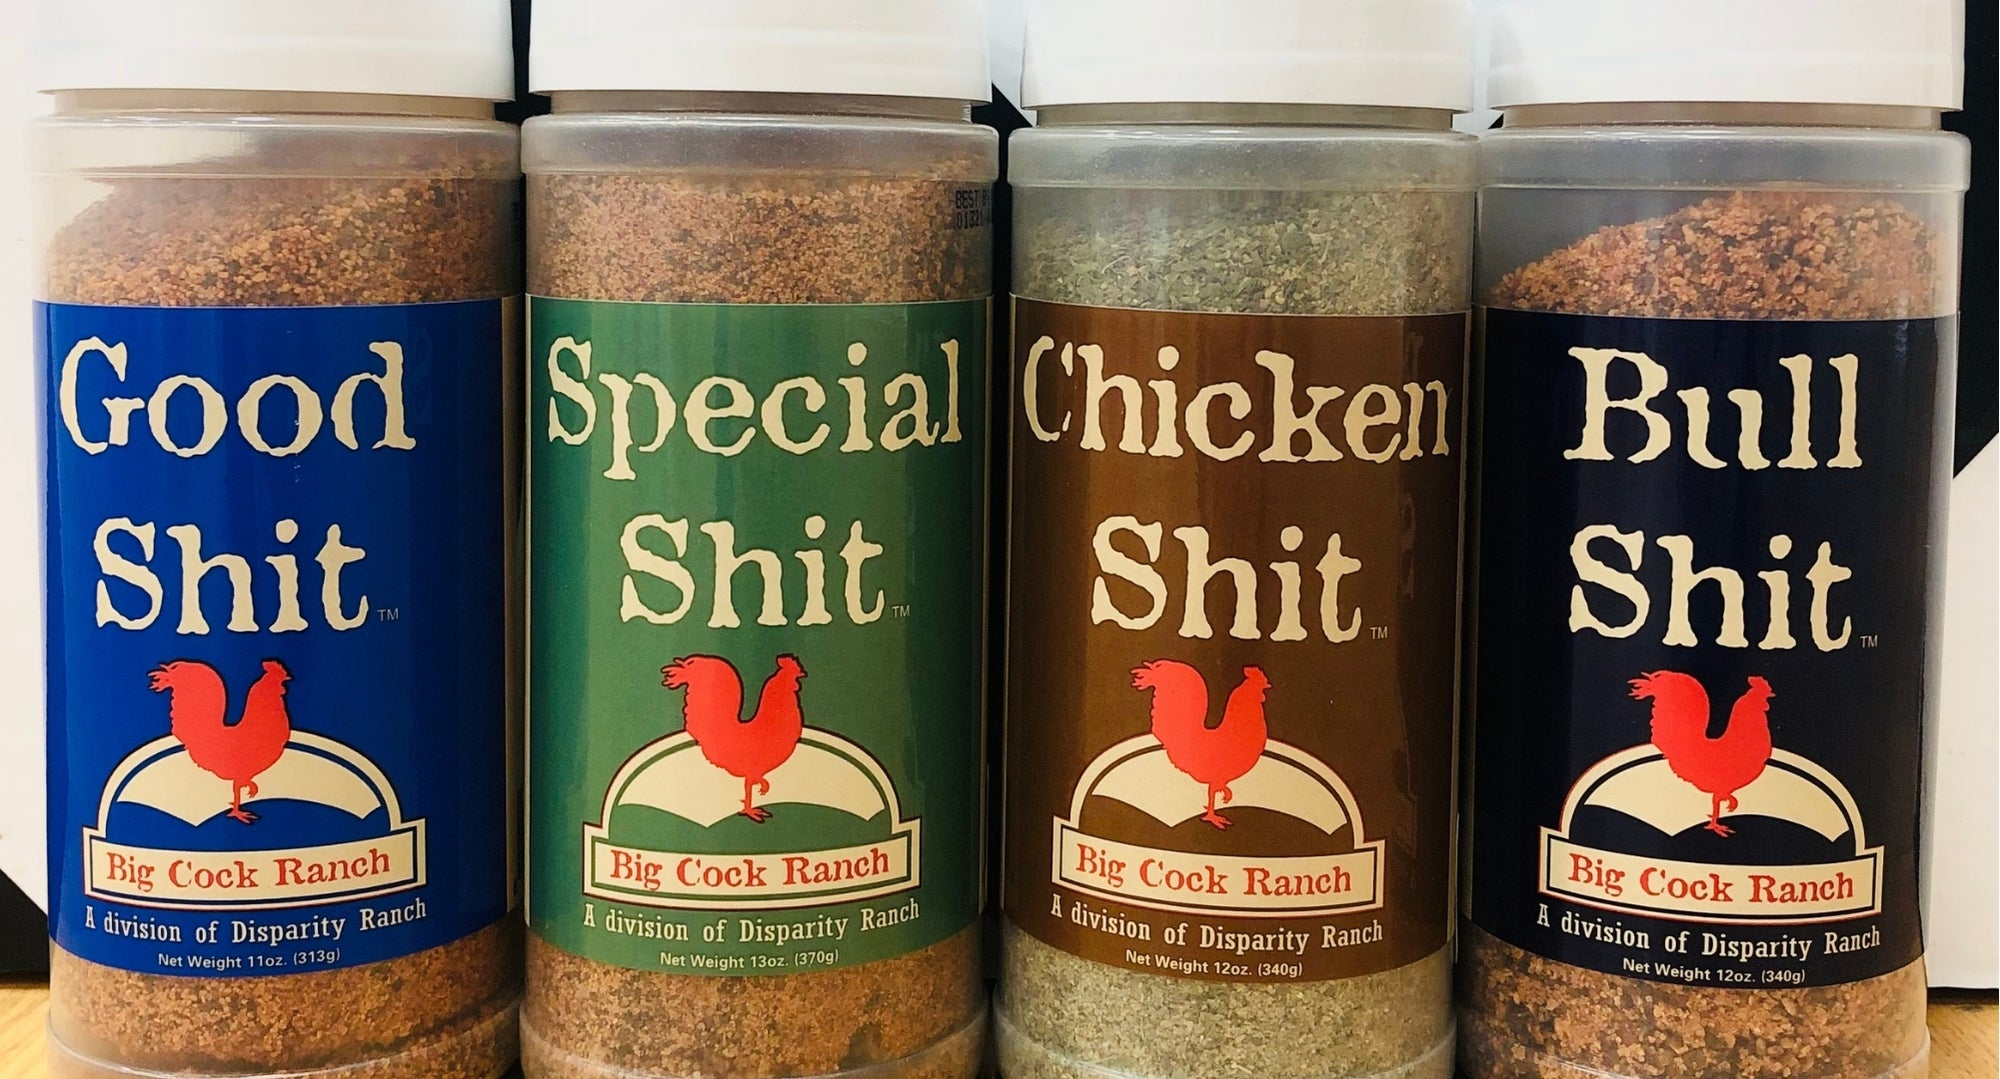 Special Shit: Bull Shit